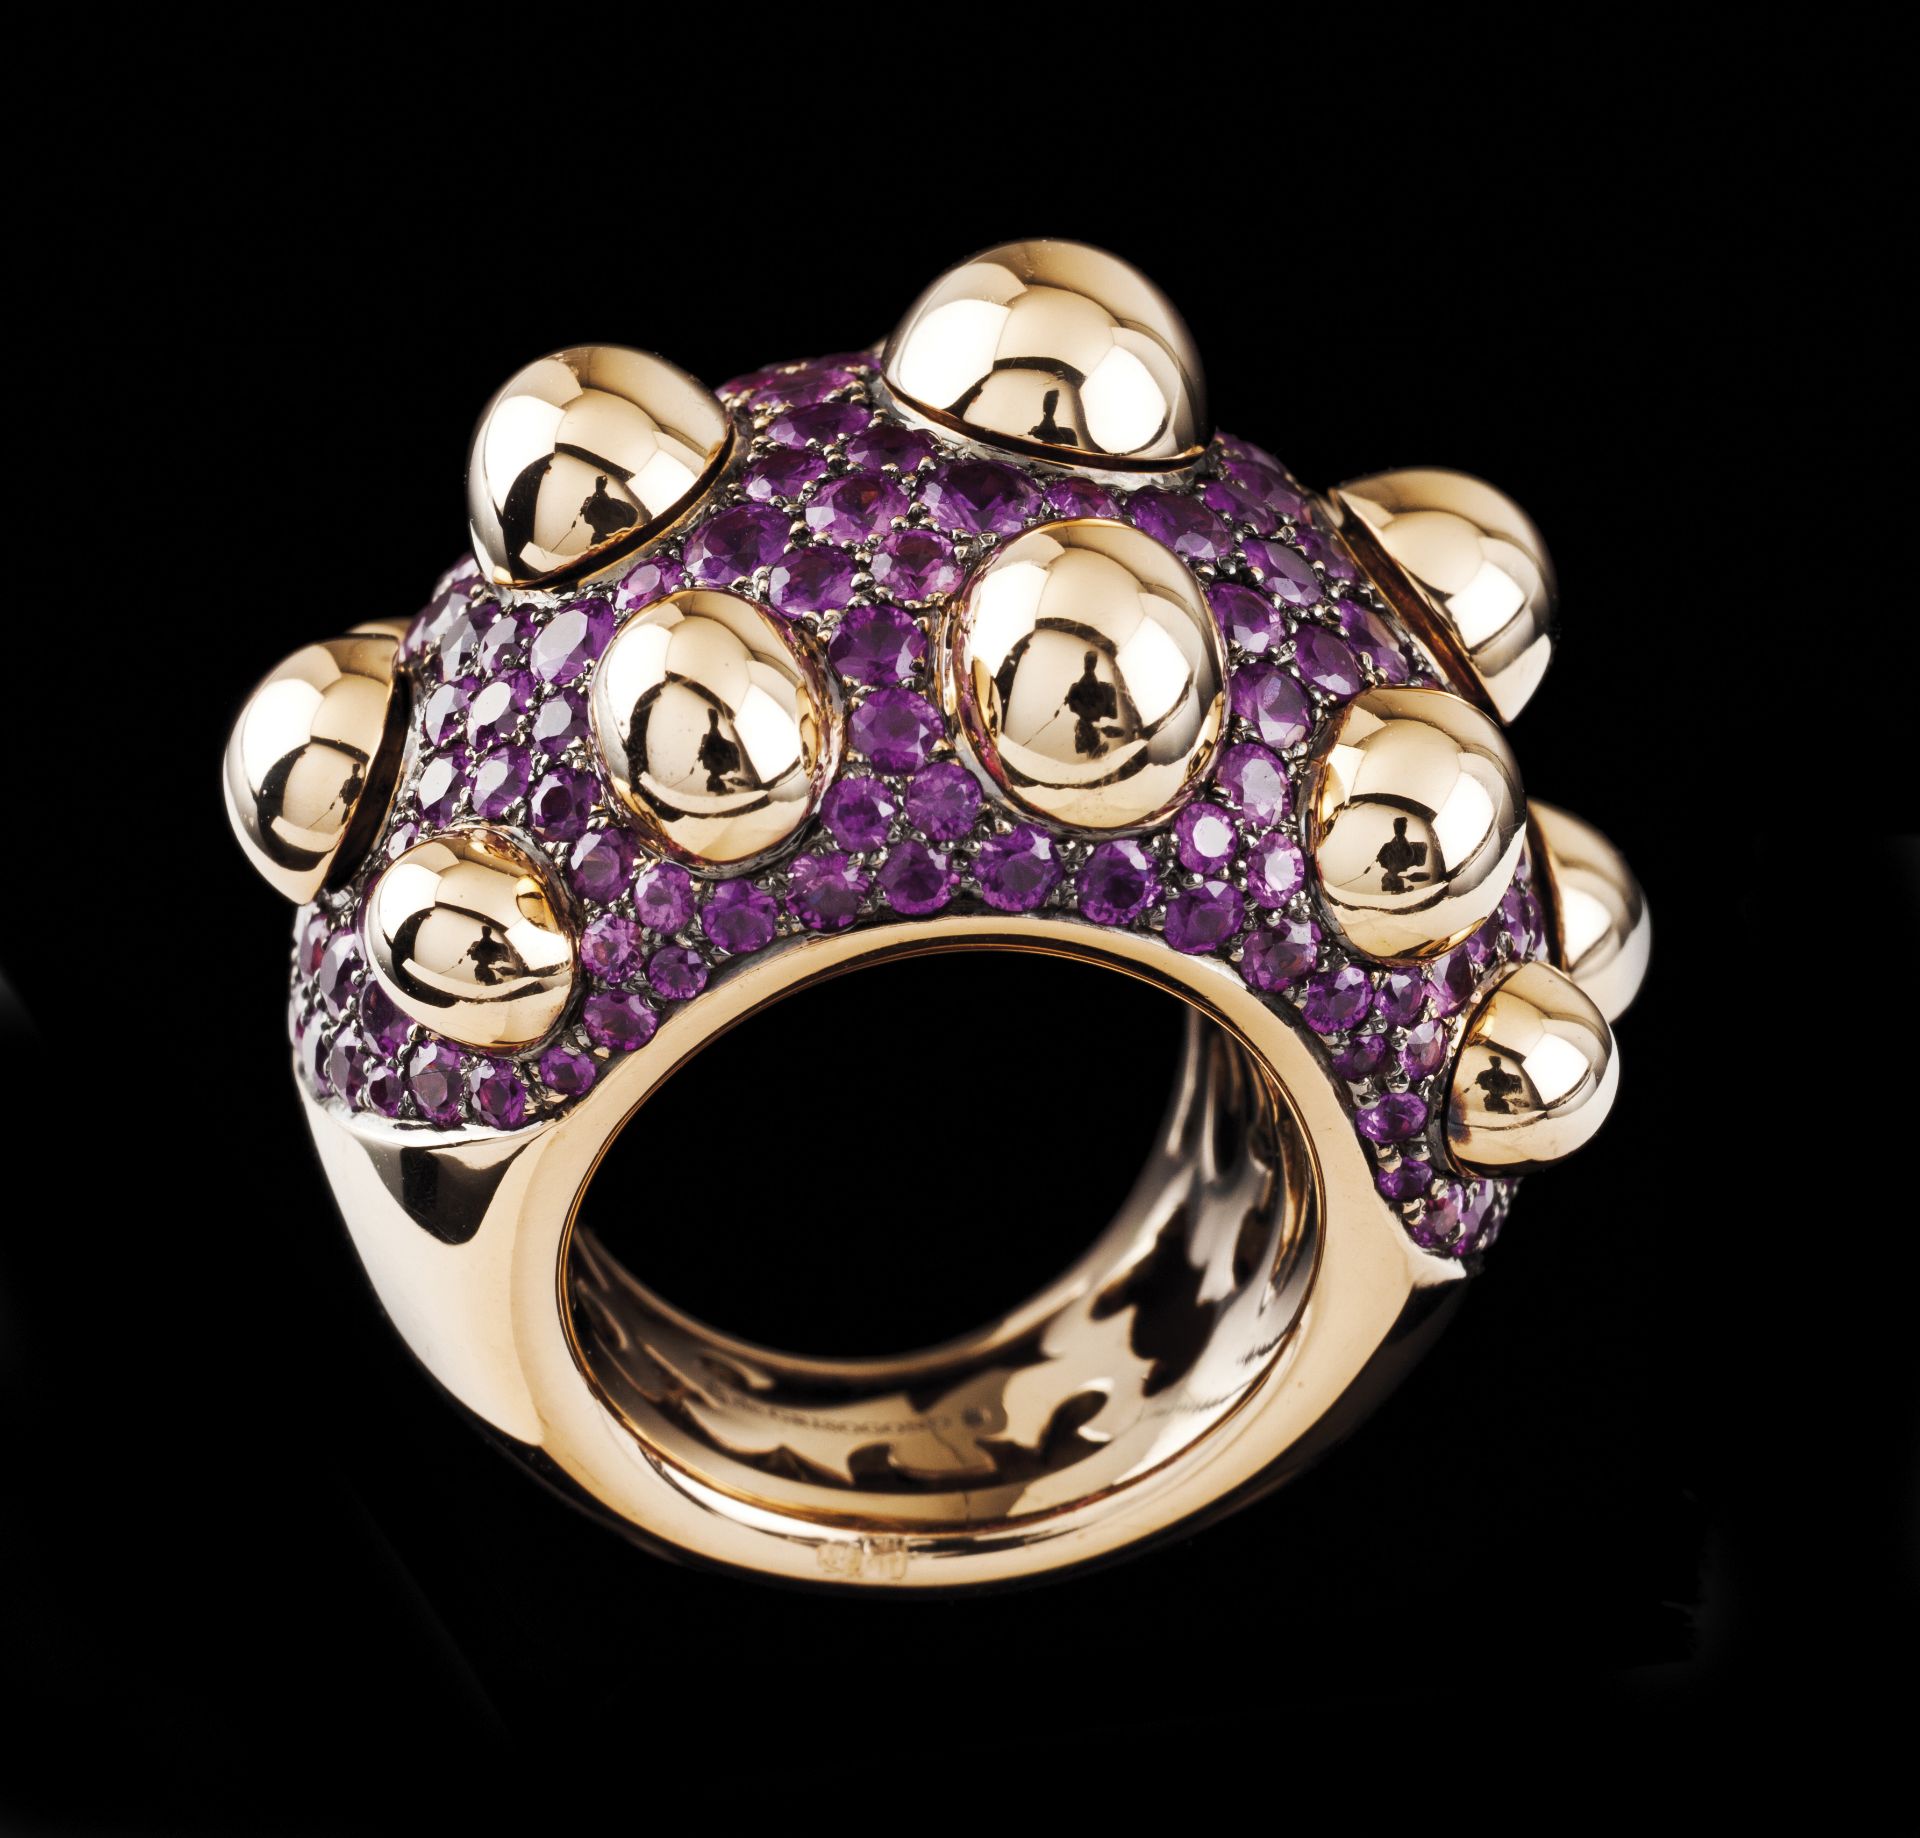 A Grisogono ringPink goldBody set in pave with 172 pink sapphires (ca.8.90ct) from which emerge gold